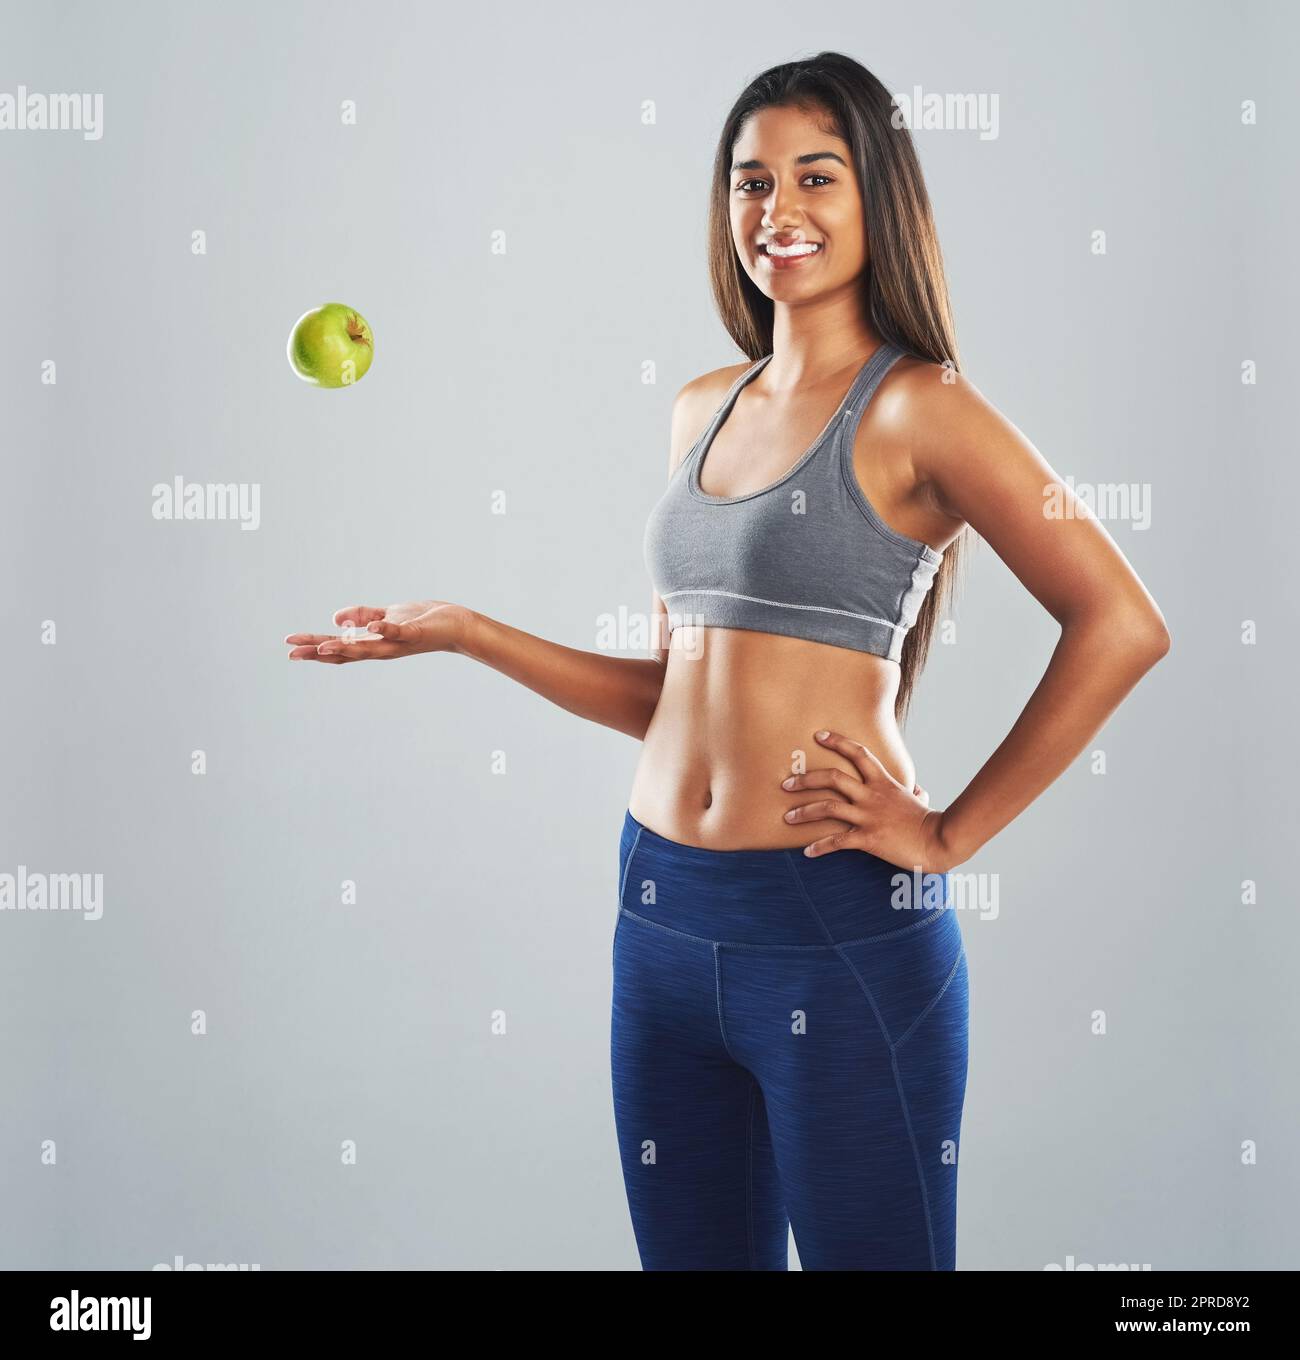 I like to add a little green to my diet. Cropped studio portrait of a happy young woman throwing an apple against a gray background. Stock Photo